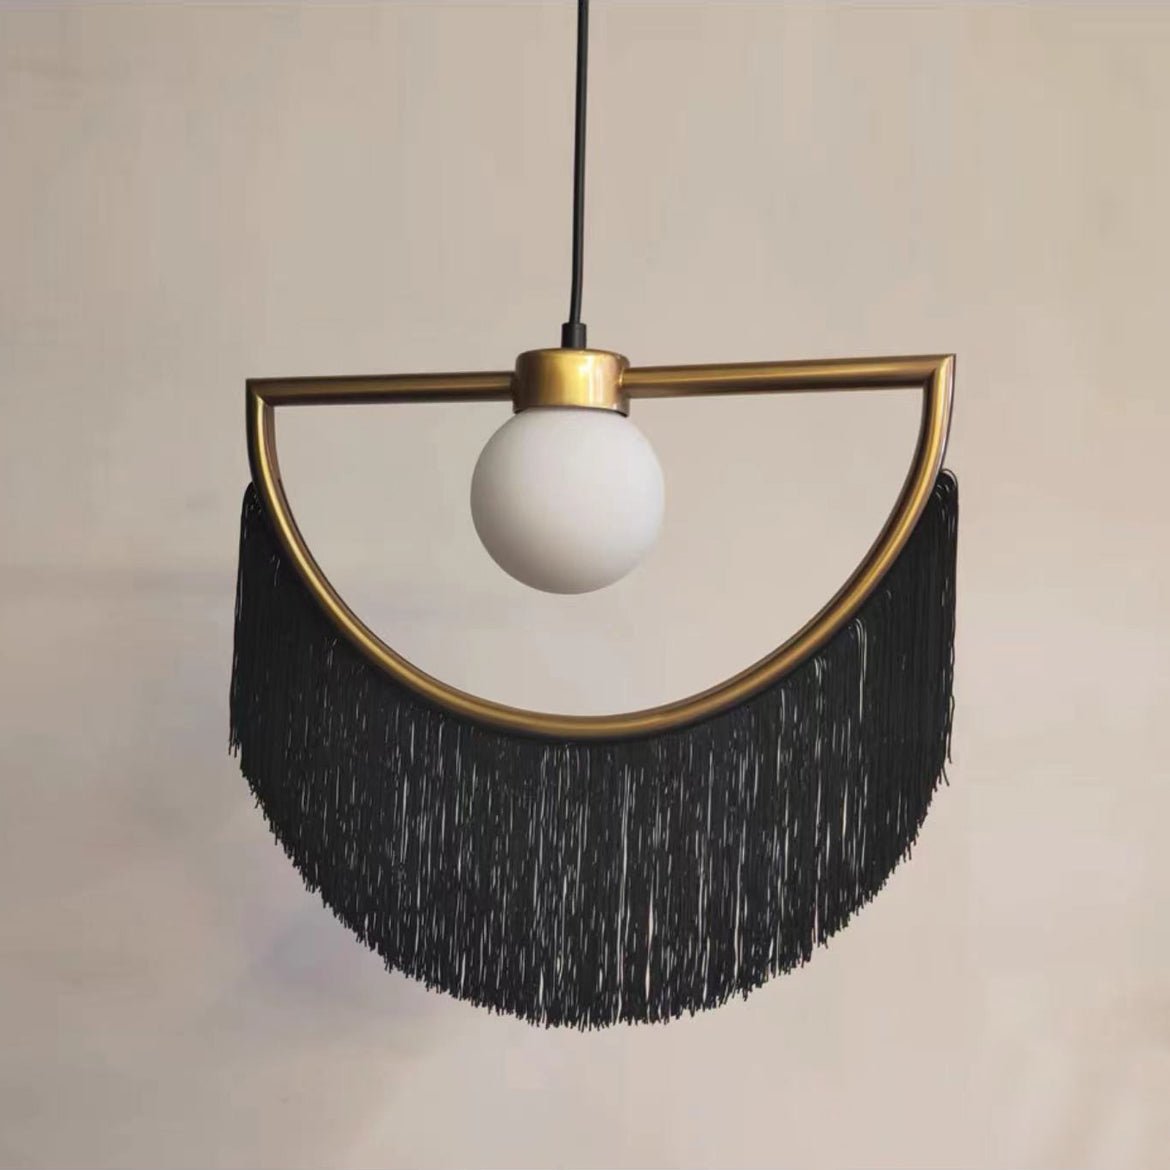 Black Wink Pendant Lamp with a diameter of 23.6 inches and a height of 18.9 inches (or a diameter of 60cm and a height of 48cm)